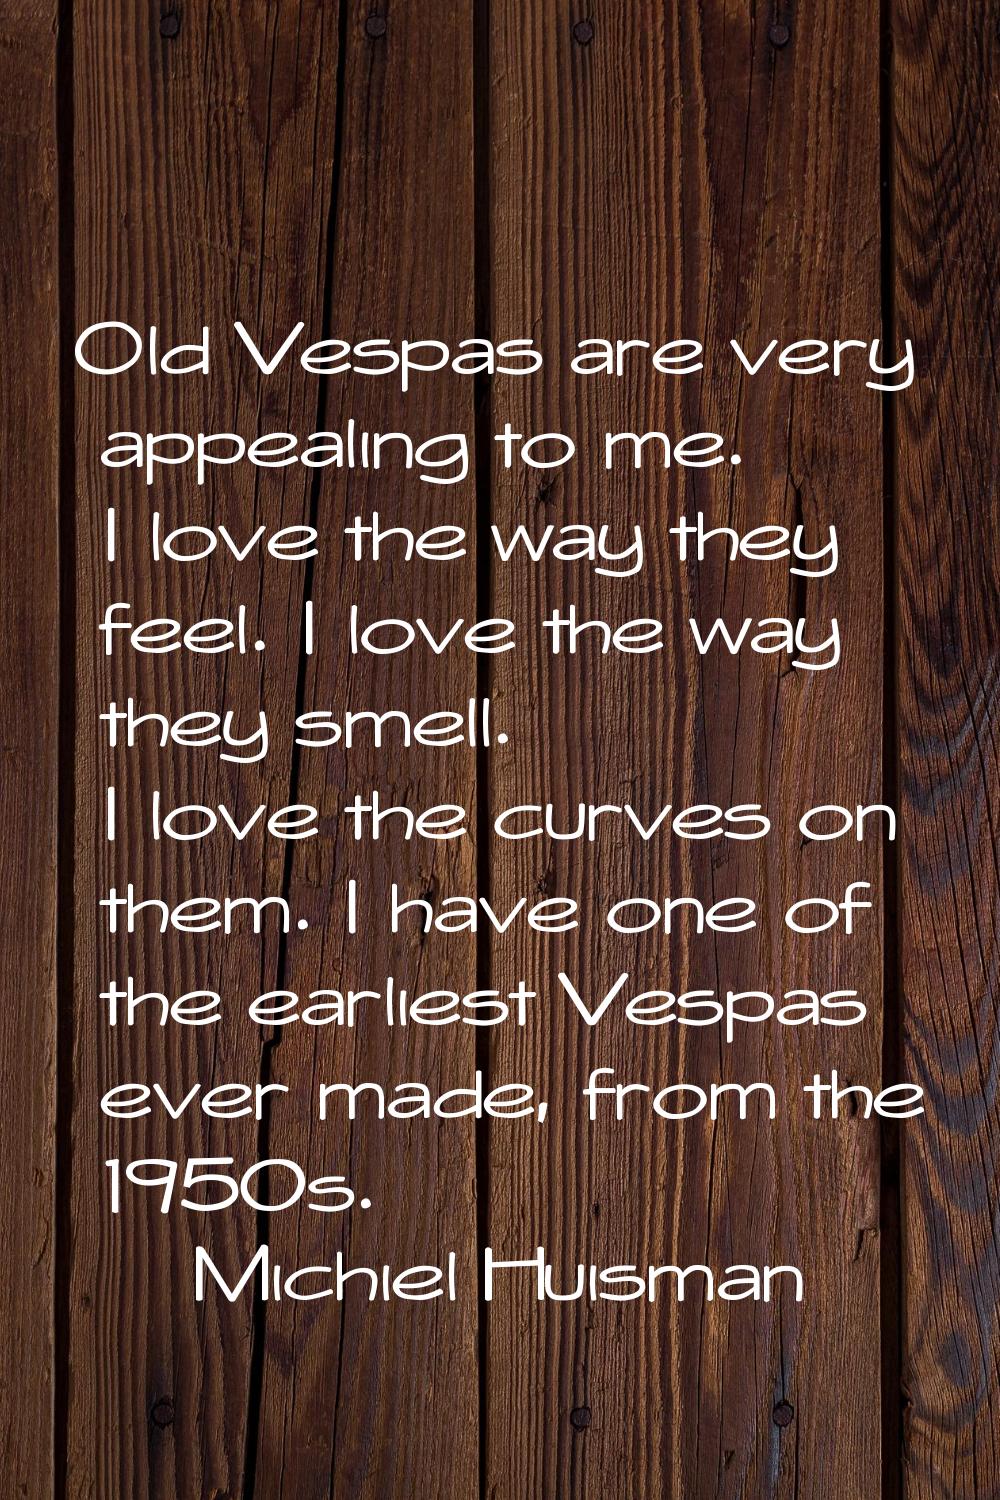 Old Vespas are very appealing to me. I love the way they feel. I love the way they smell. I love th